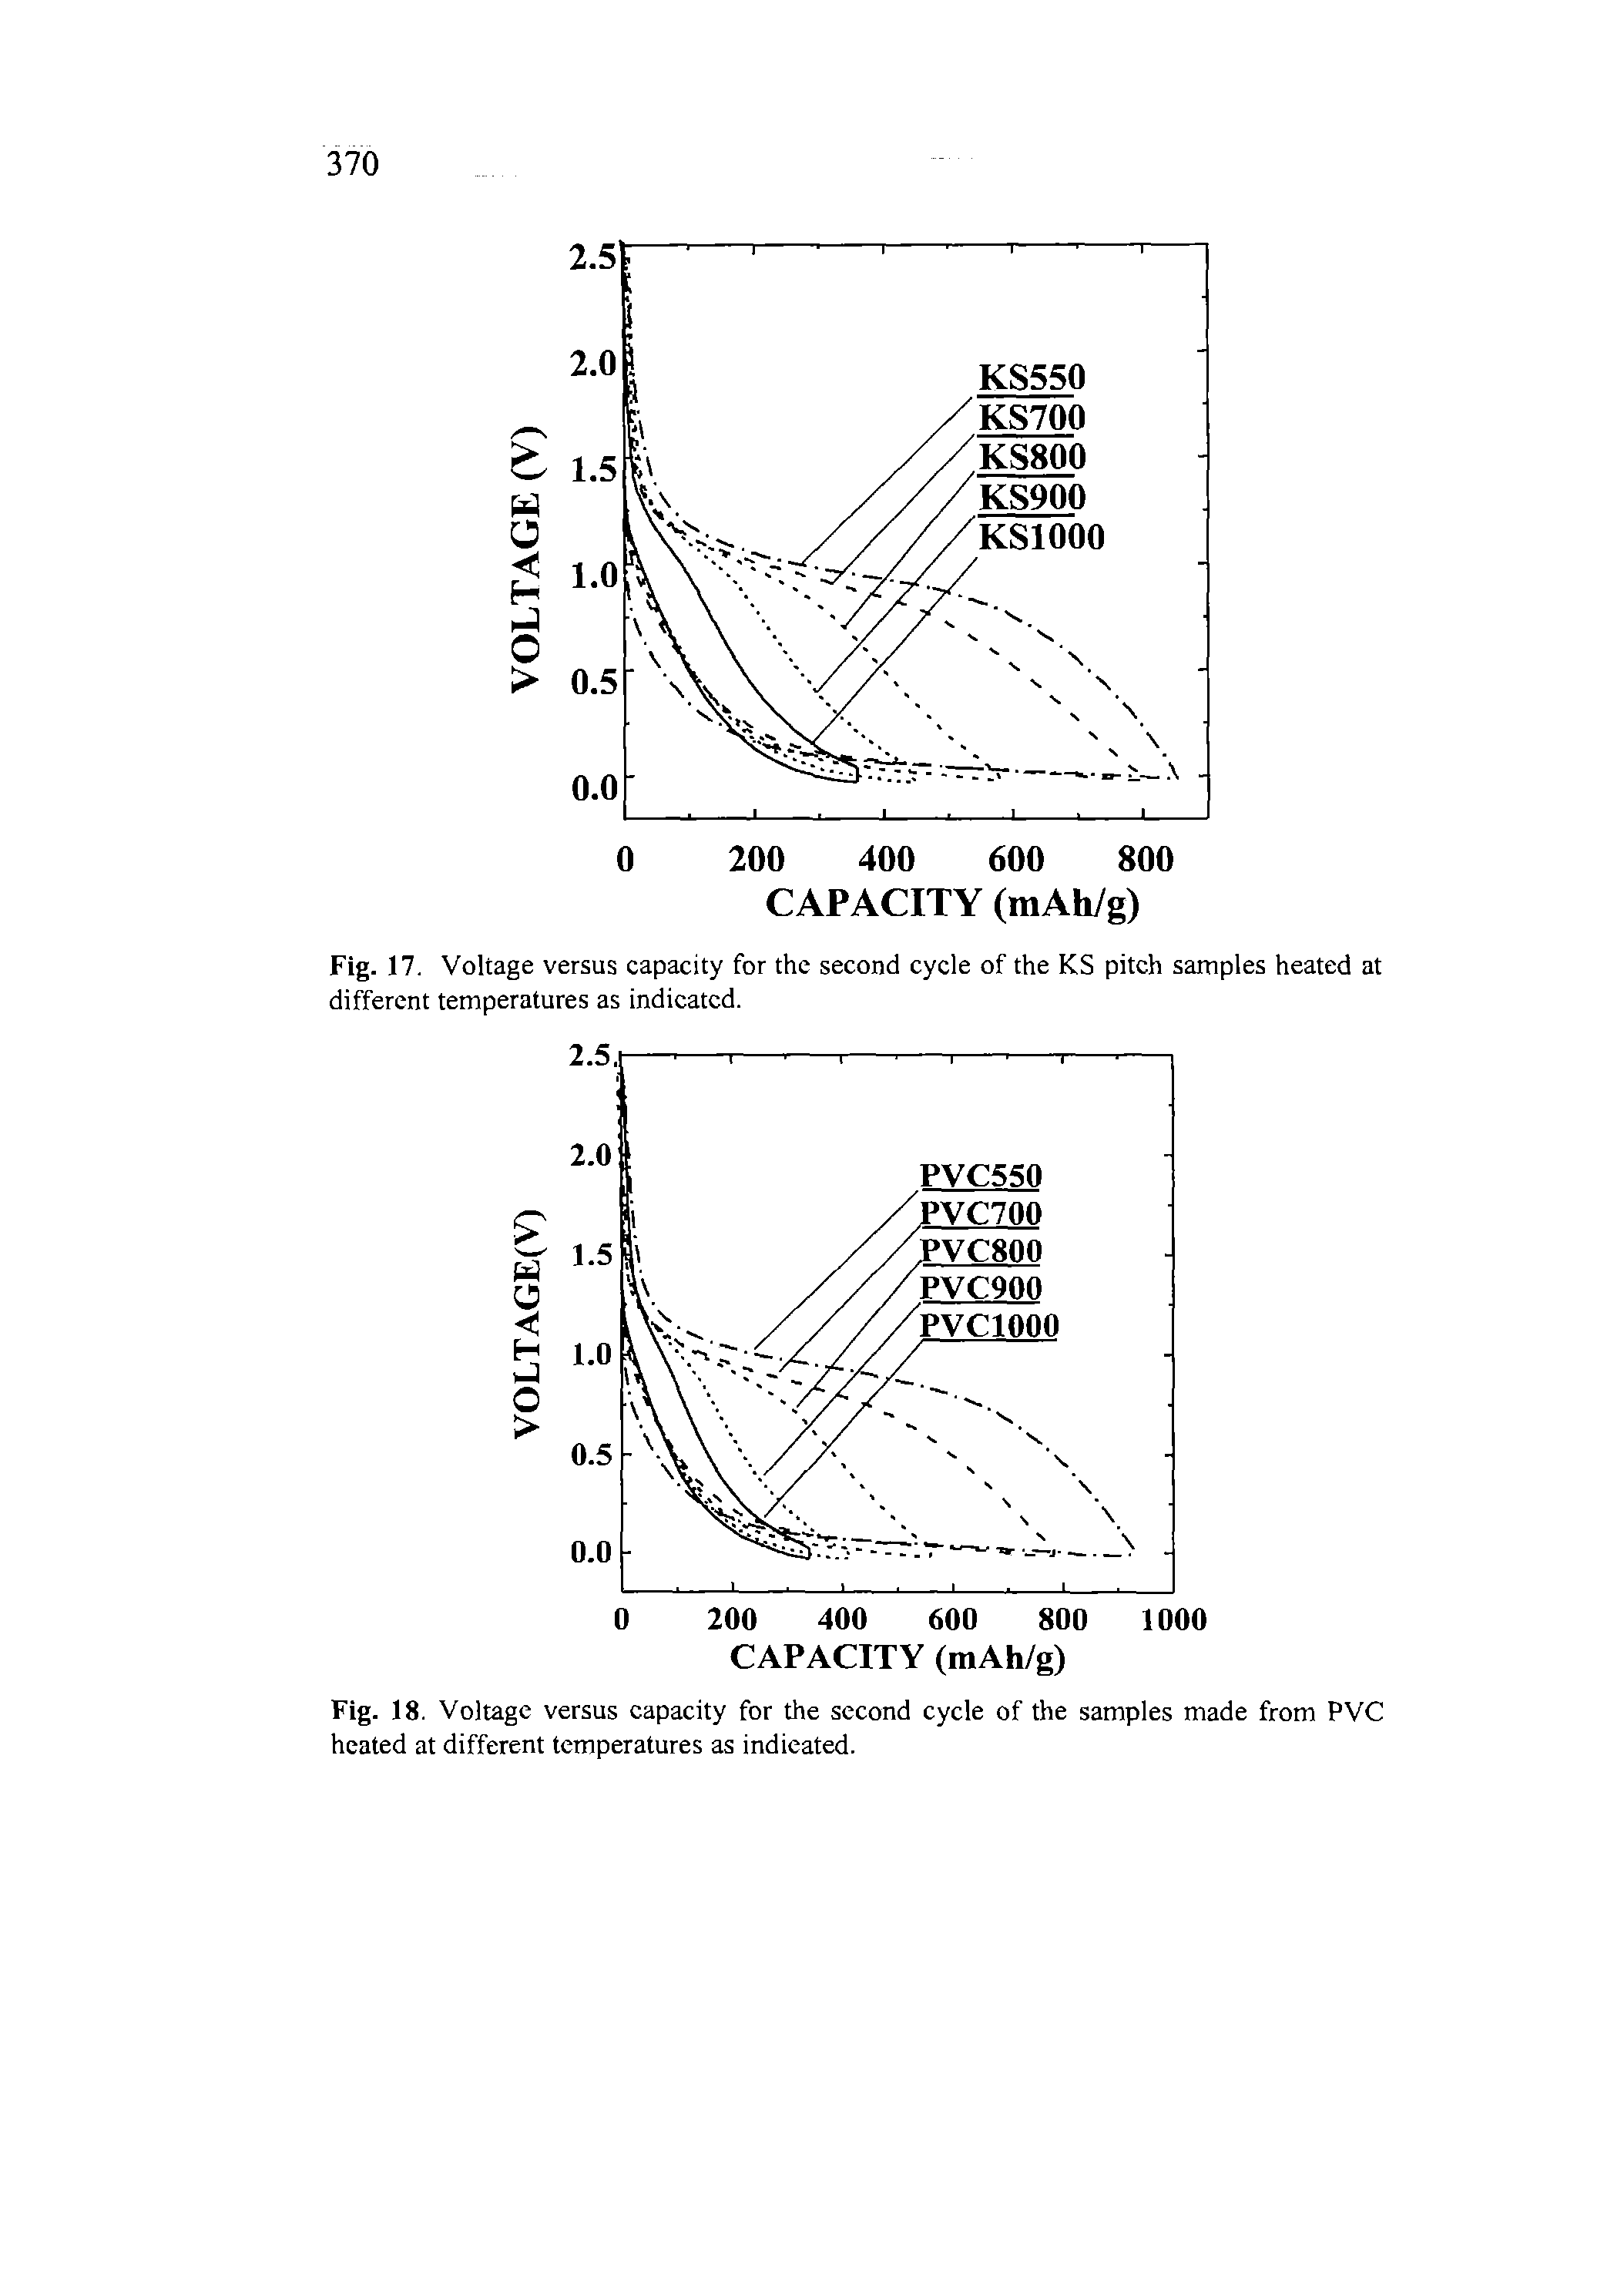 Fig. 17. Voltage versus capacity for the second cycle of the KS pitch samples heated at different temperatures as indicated.